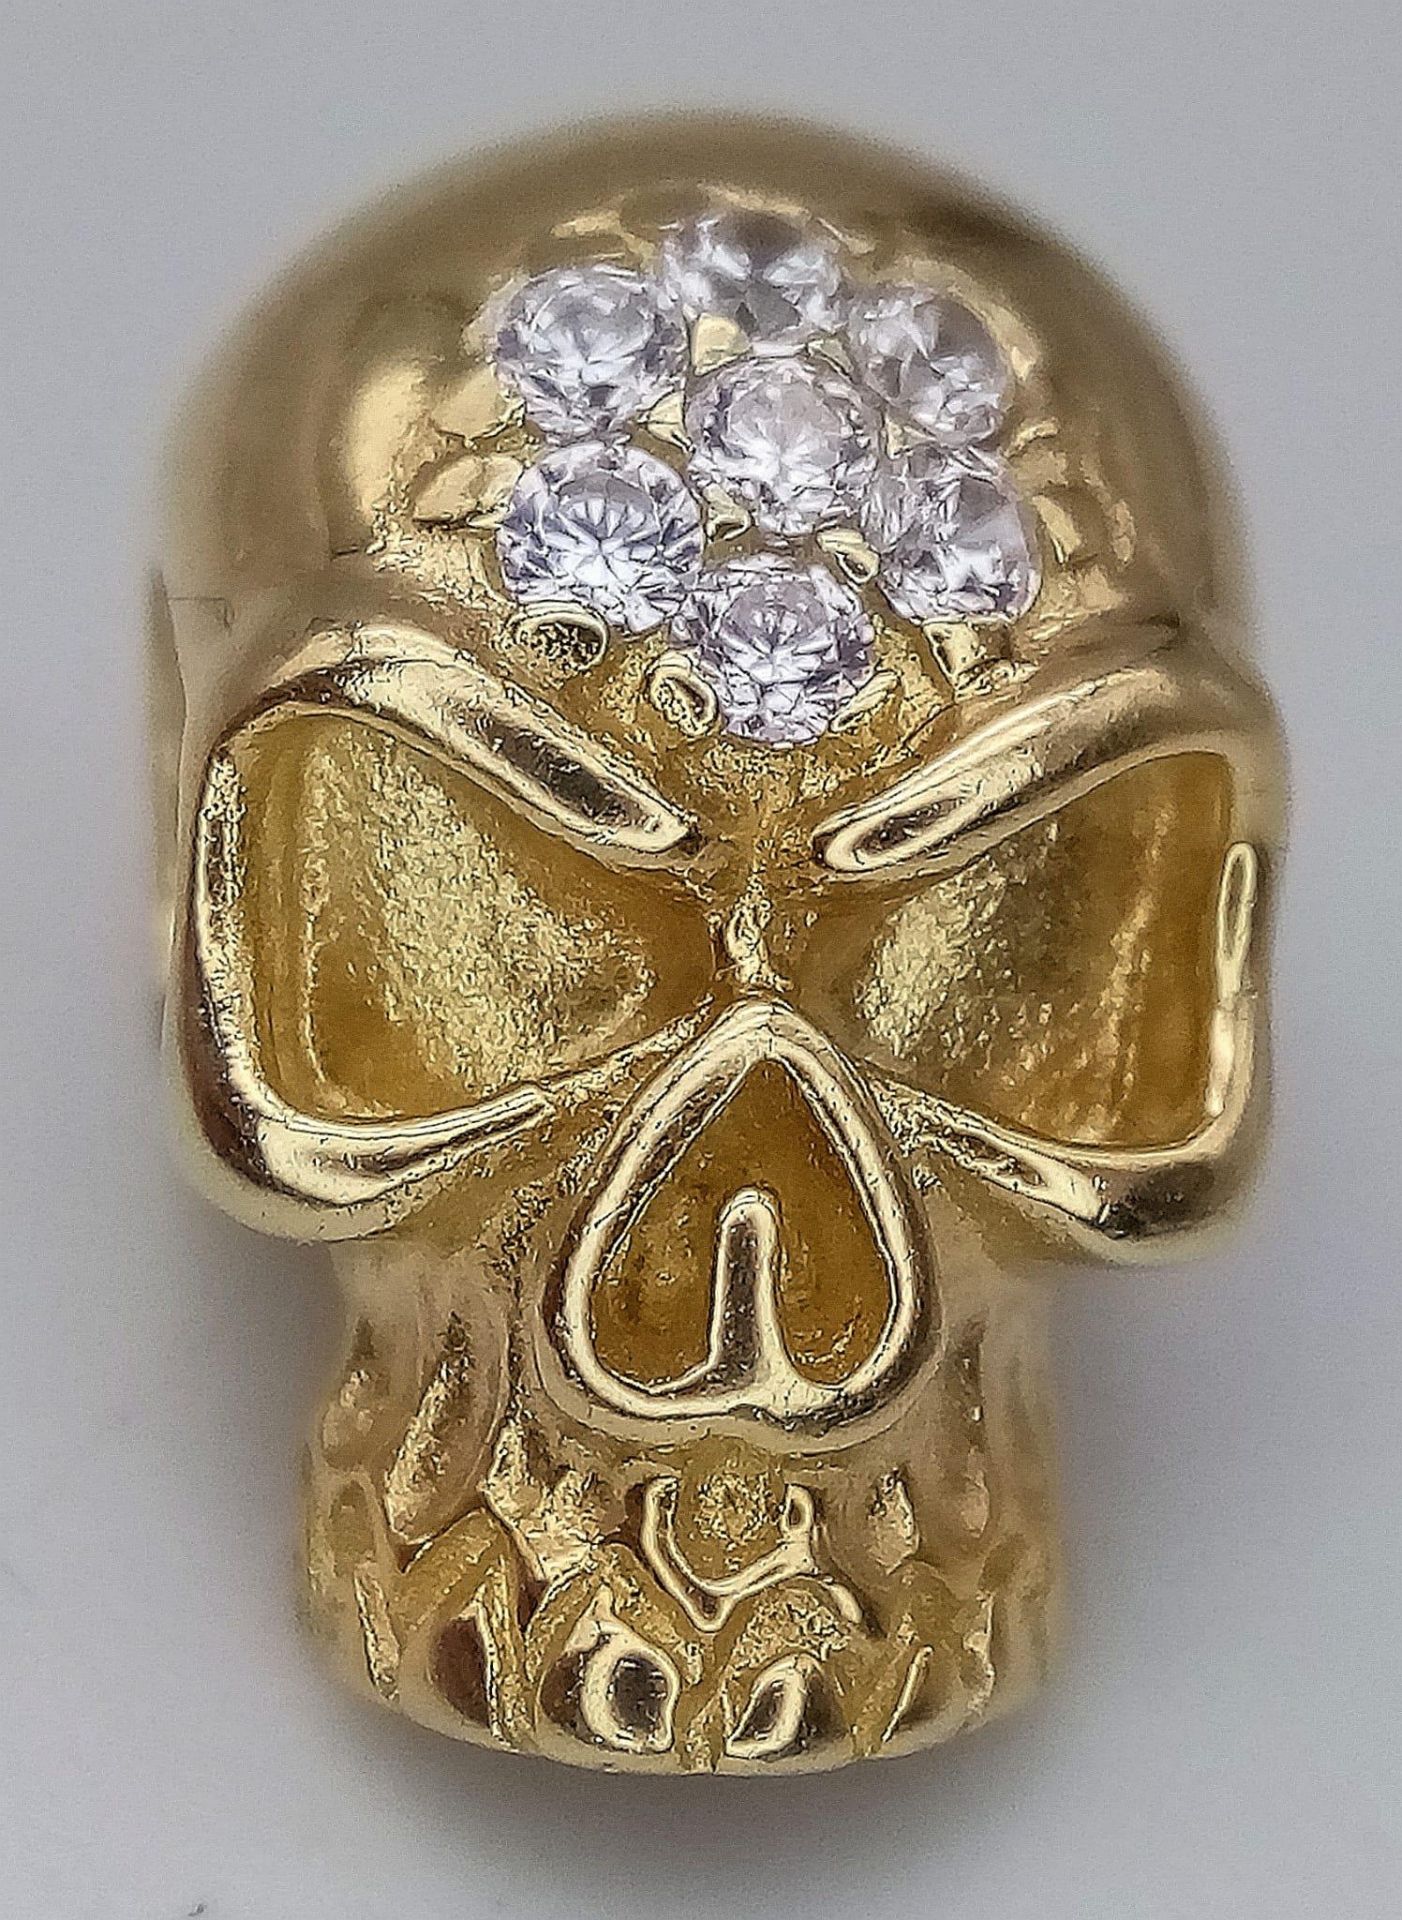 A 14K YELLOW GOLD HIRST-ESQUE STONE SKULL PENDANT. 4.4G